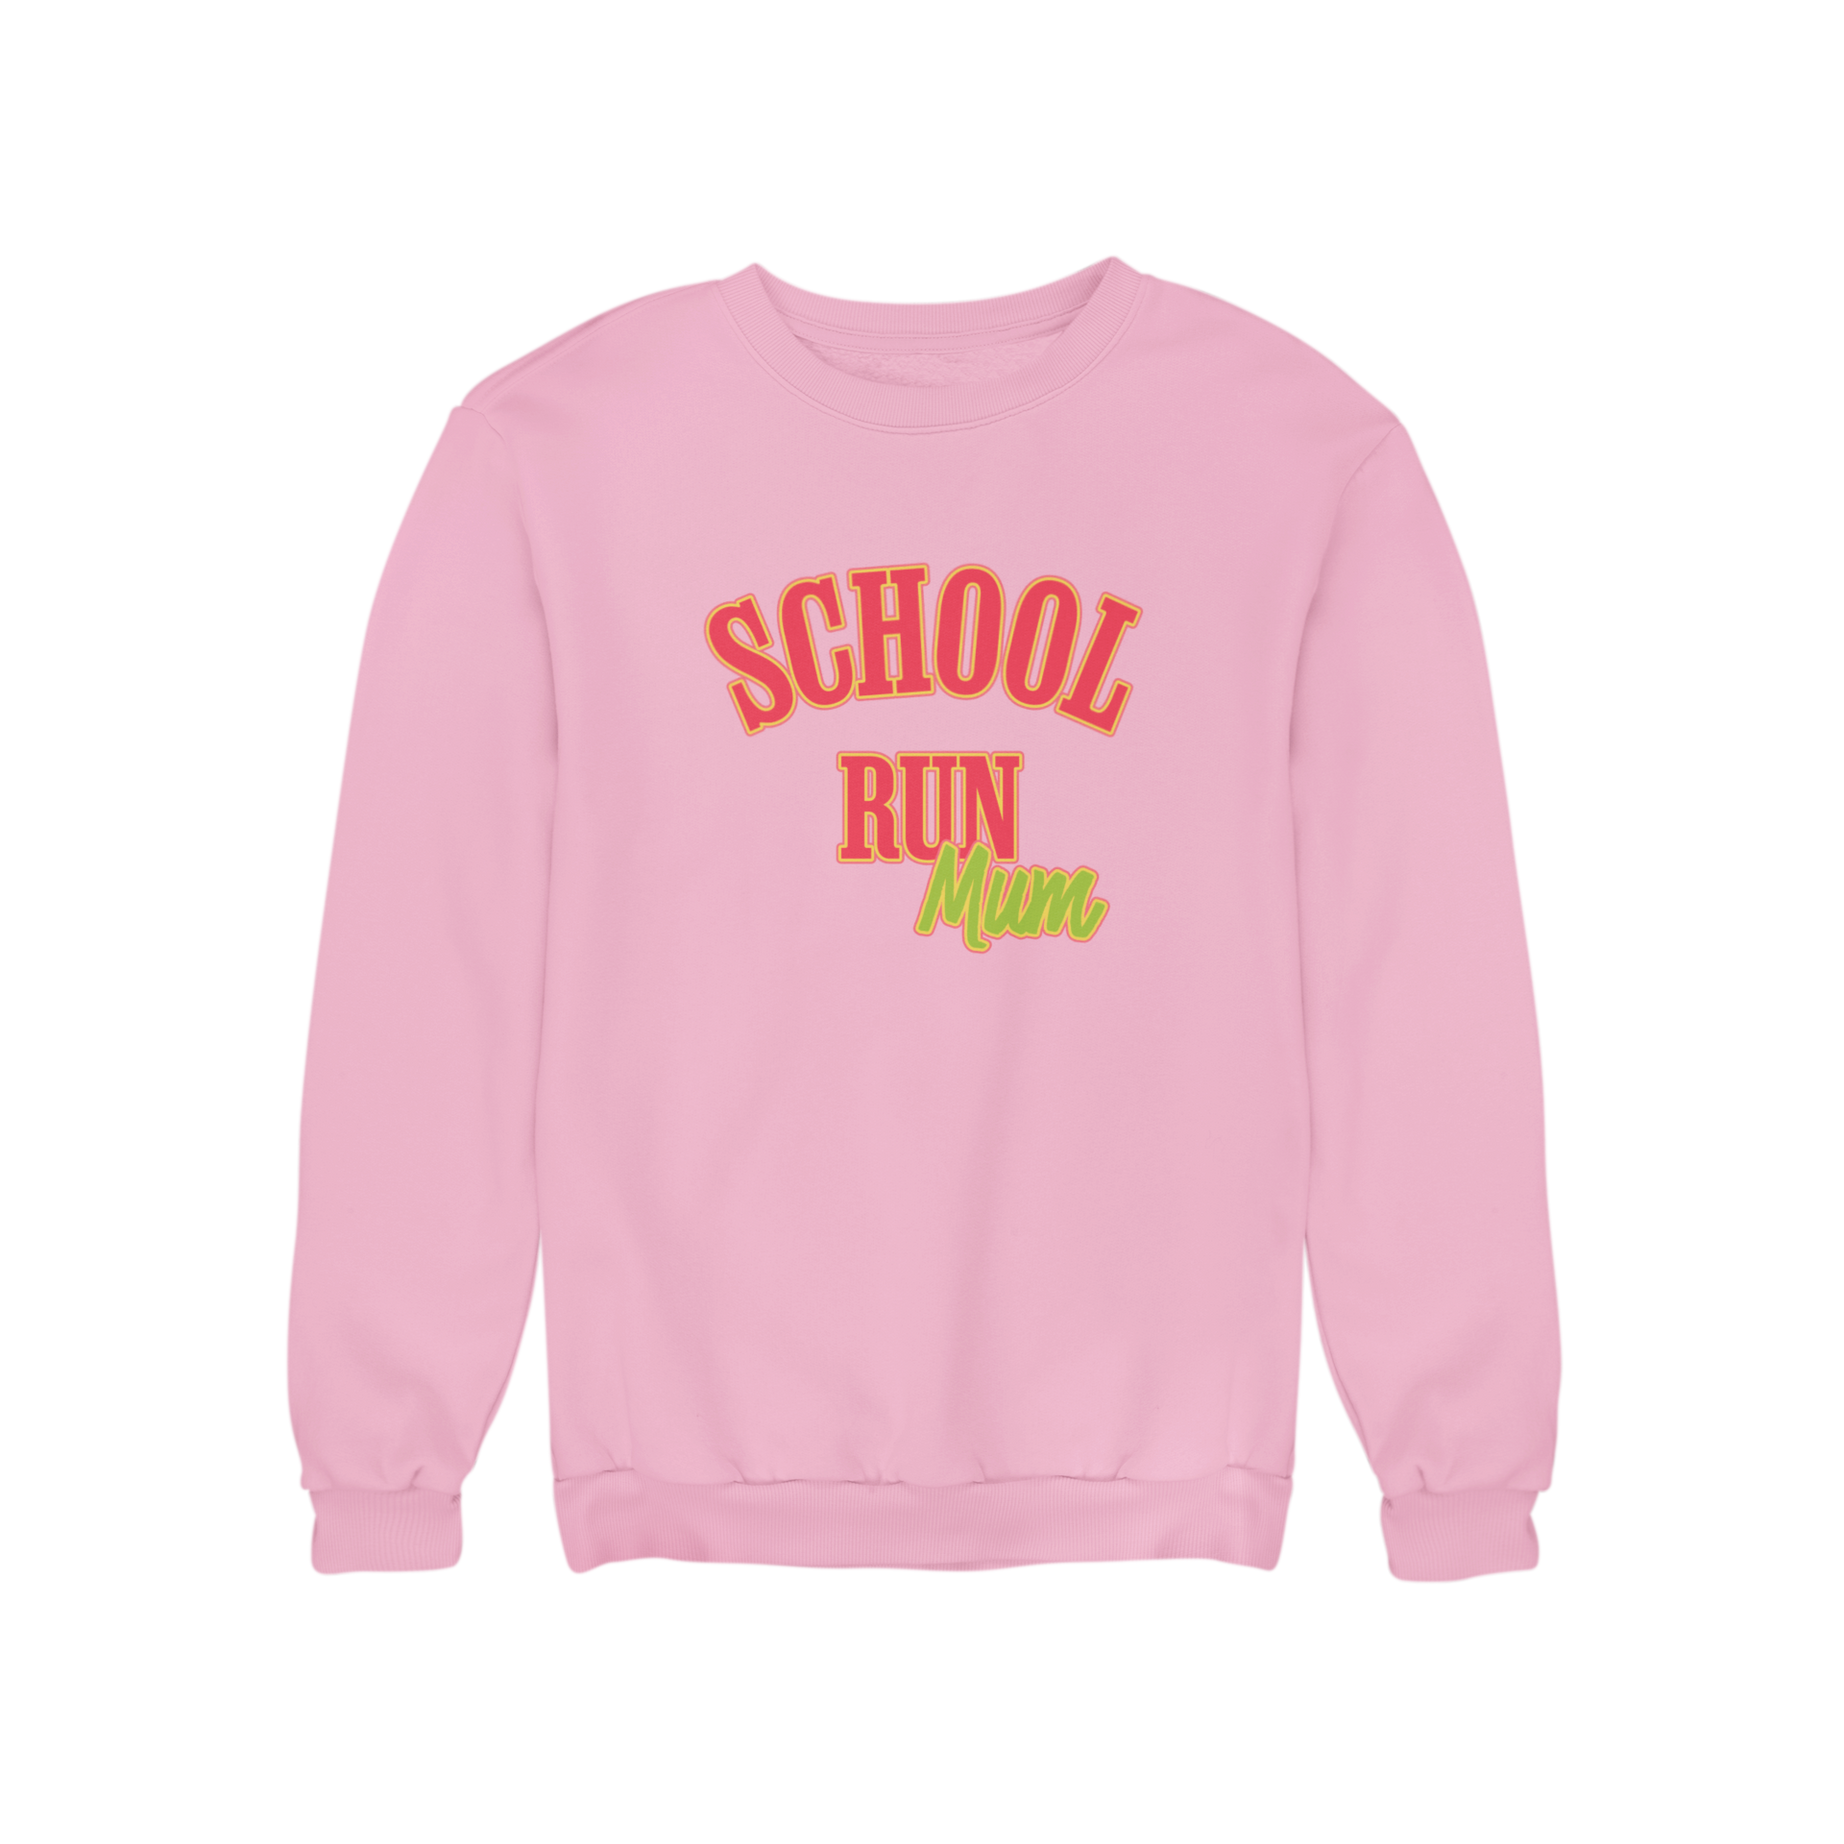 Looking for the perfect sweatshirt for school run mums? Look no further than Teevolution! Our "School Run Mum" slogan sweatshirt is perfect for busy mums who want to look cool and stylish while running around. Get yours today and make your morning routine a little more fashionable!